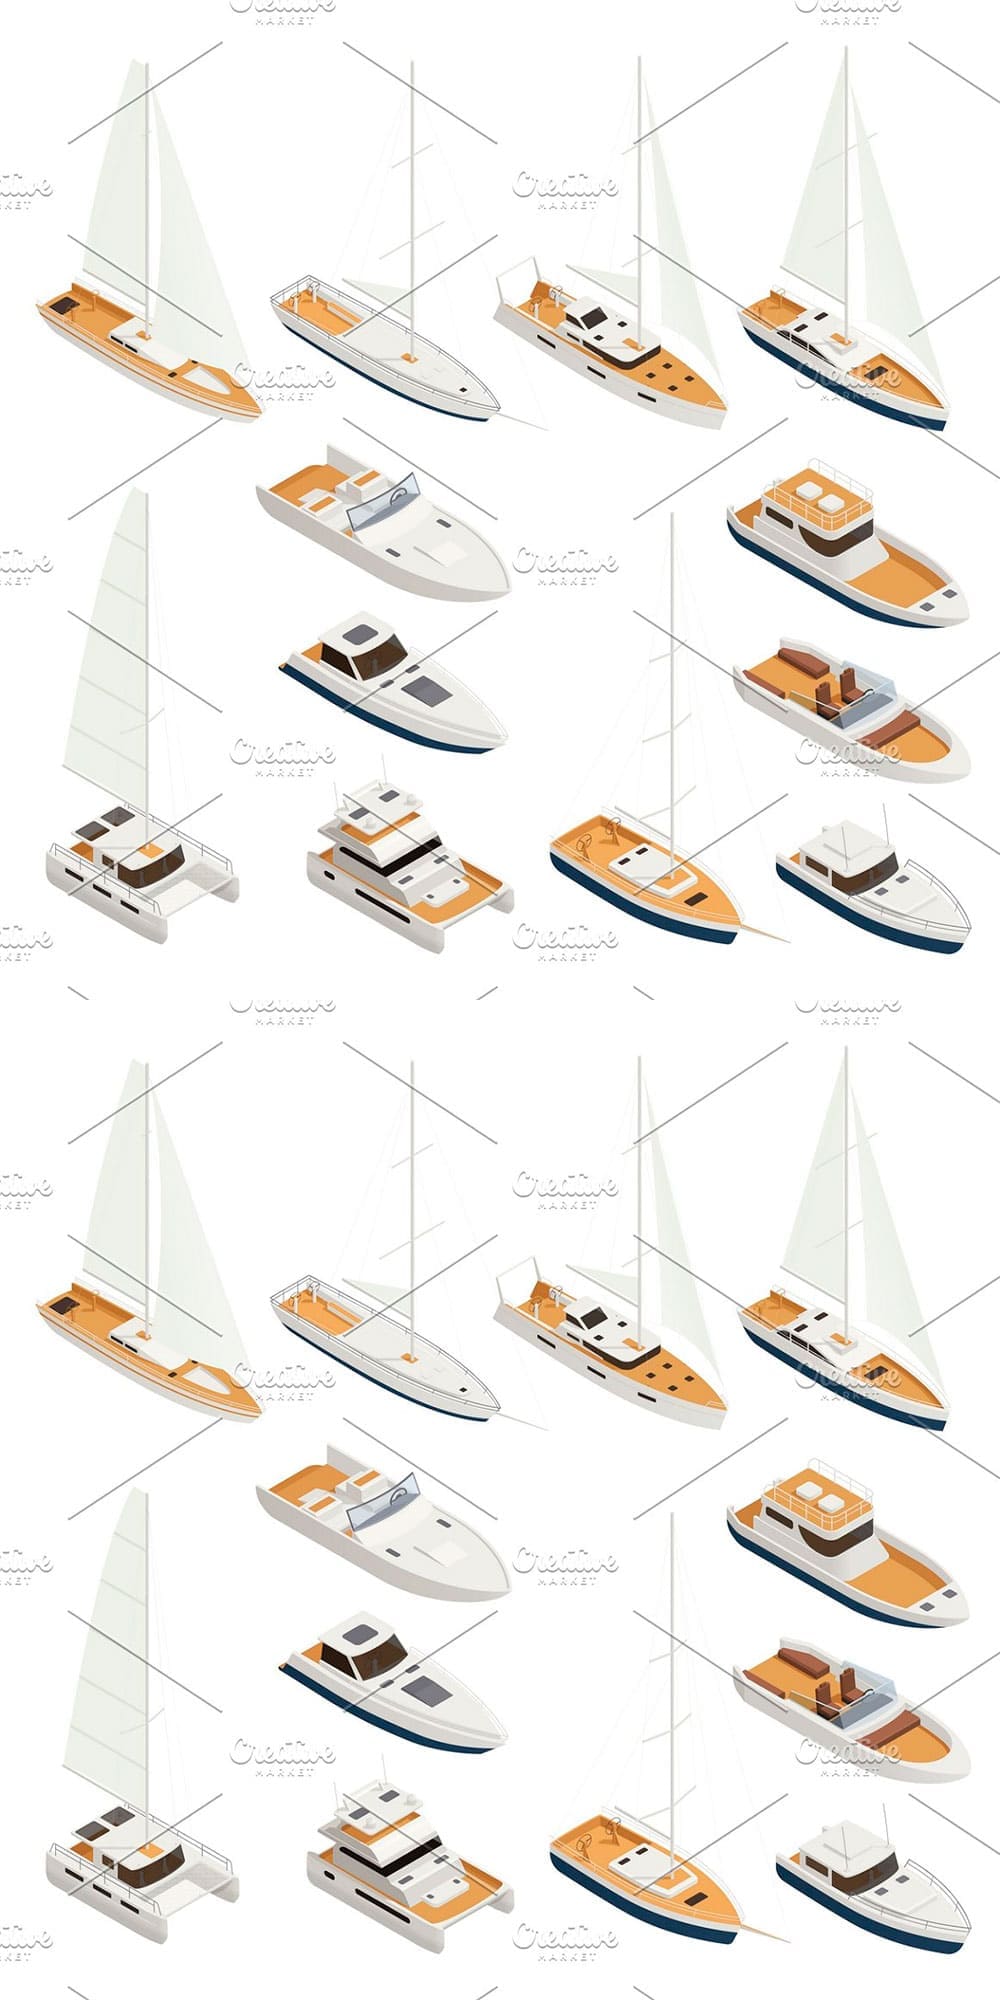 Yachting isometric icon set, picture for pinterest.